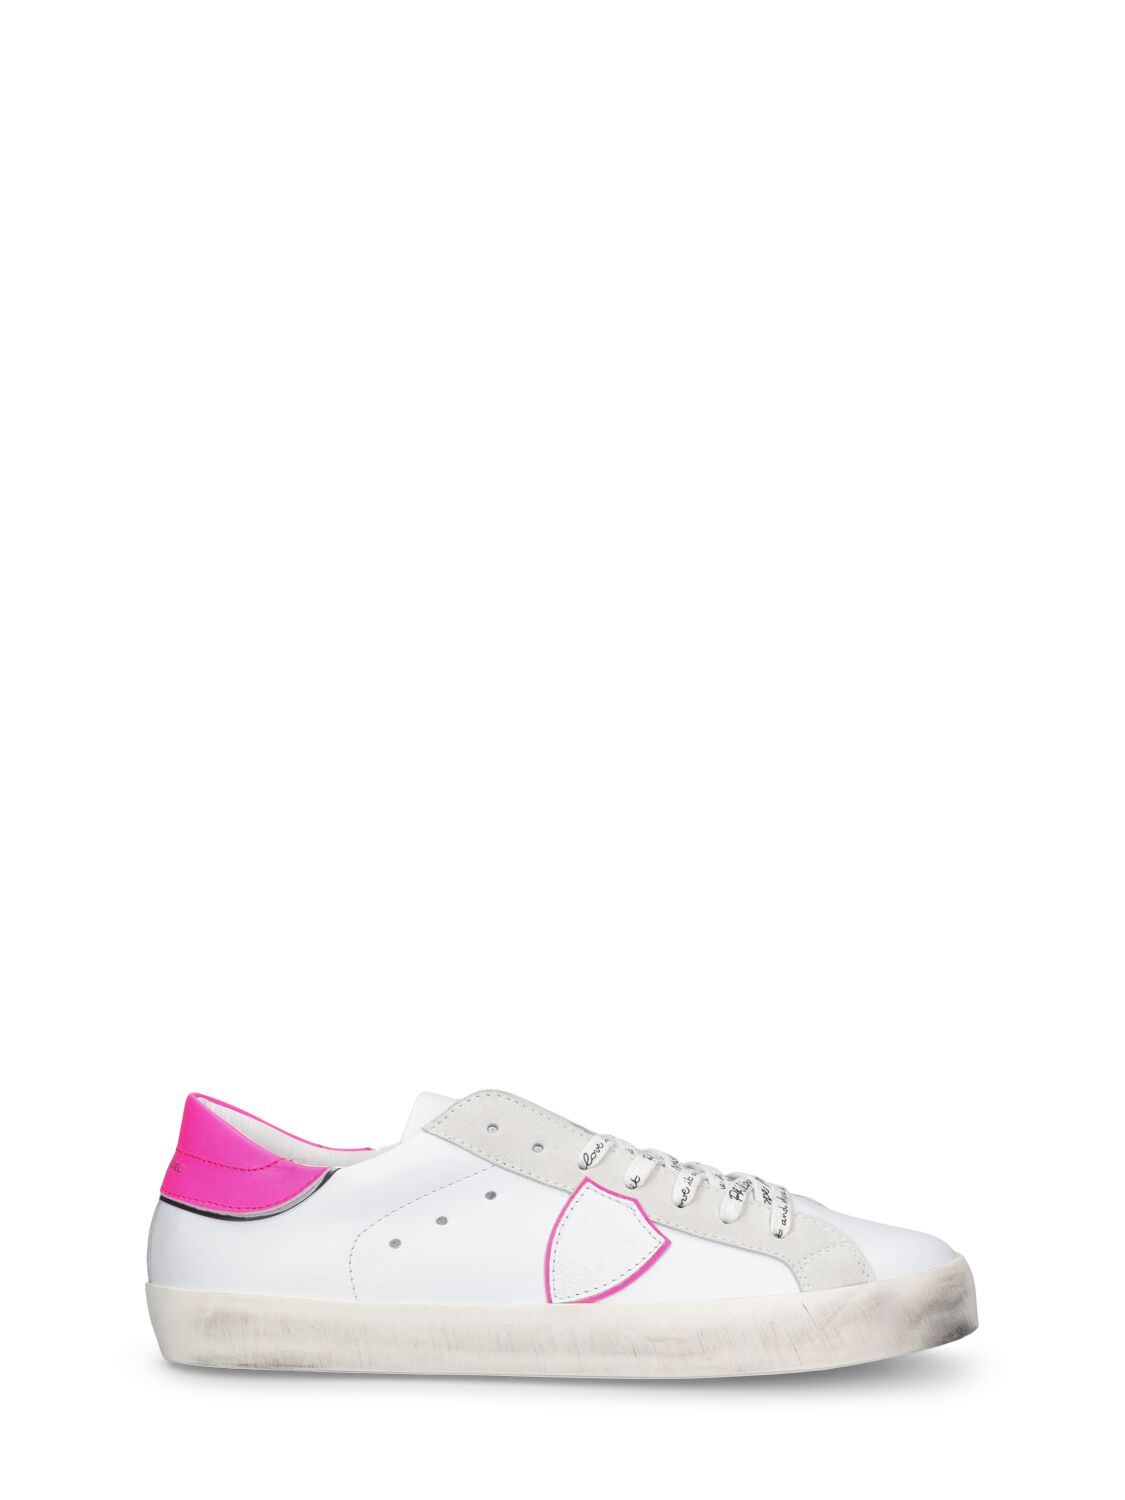 Philippe Model Kids' Paris Leather Lace-up Sneakers In White,fuchsia